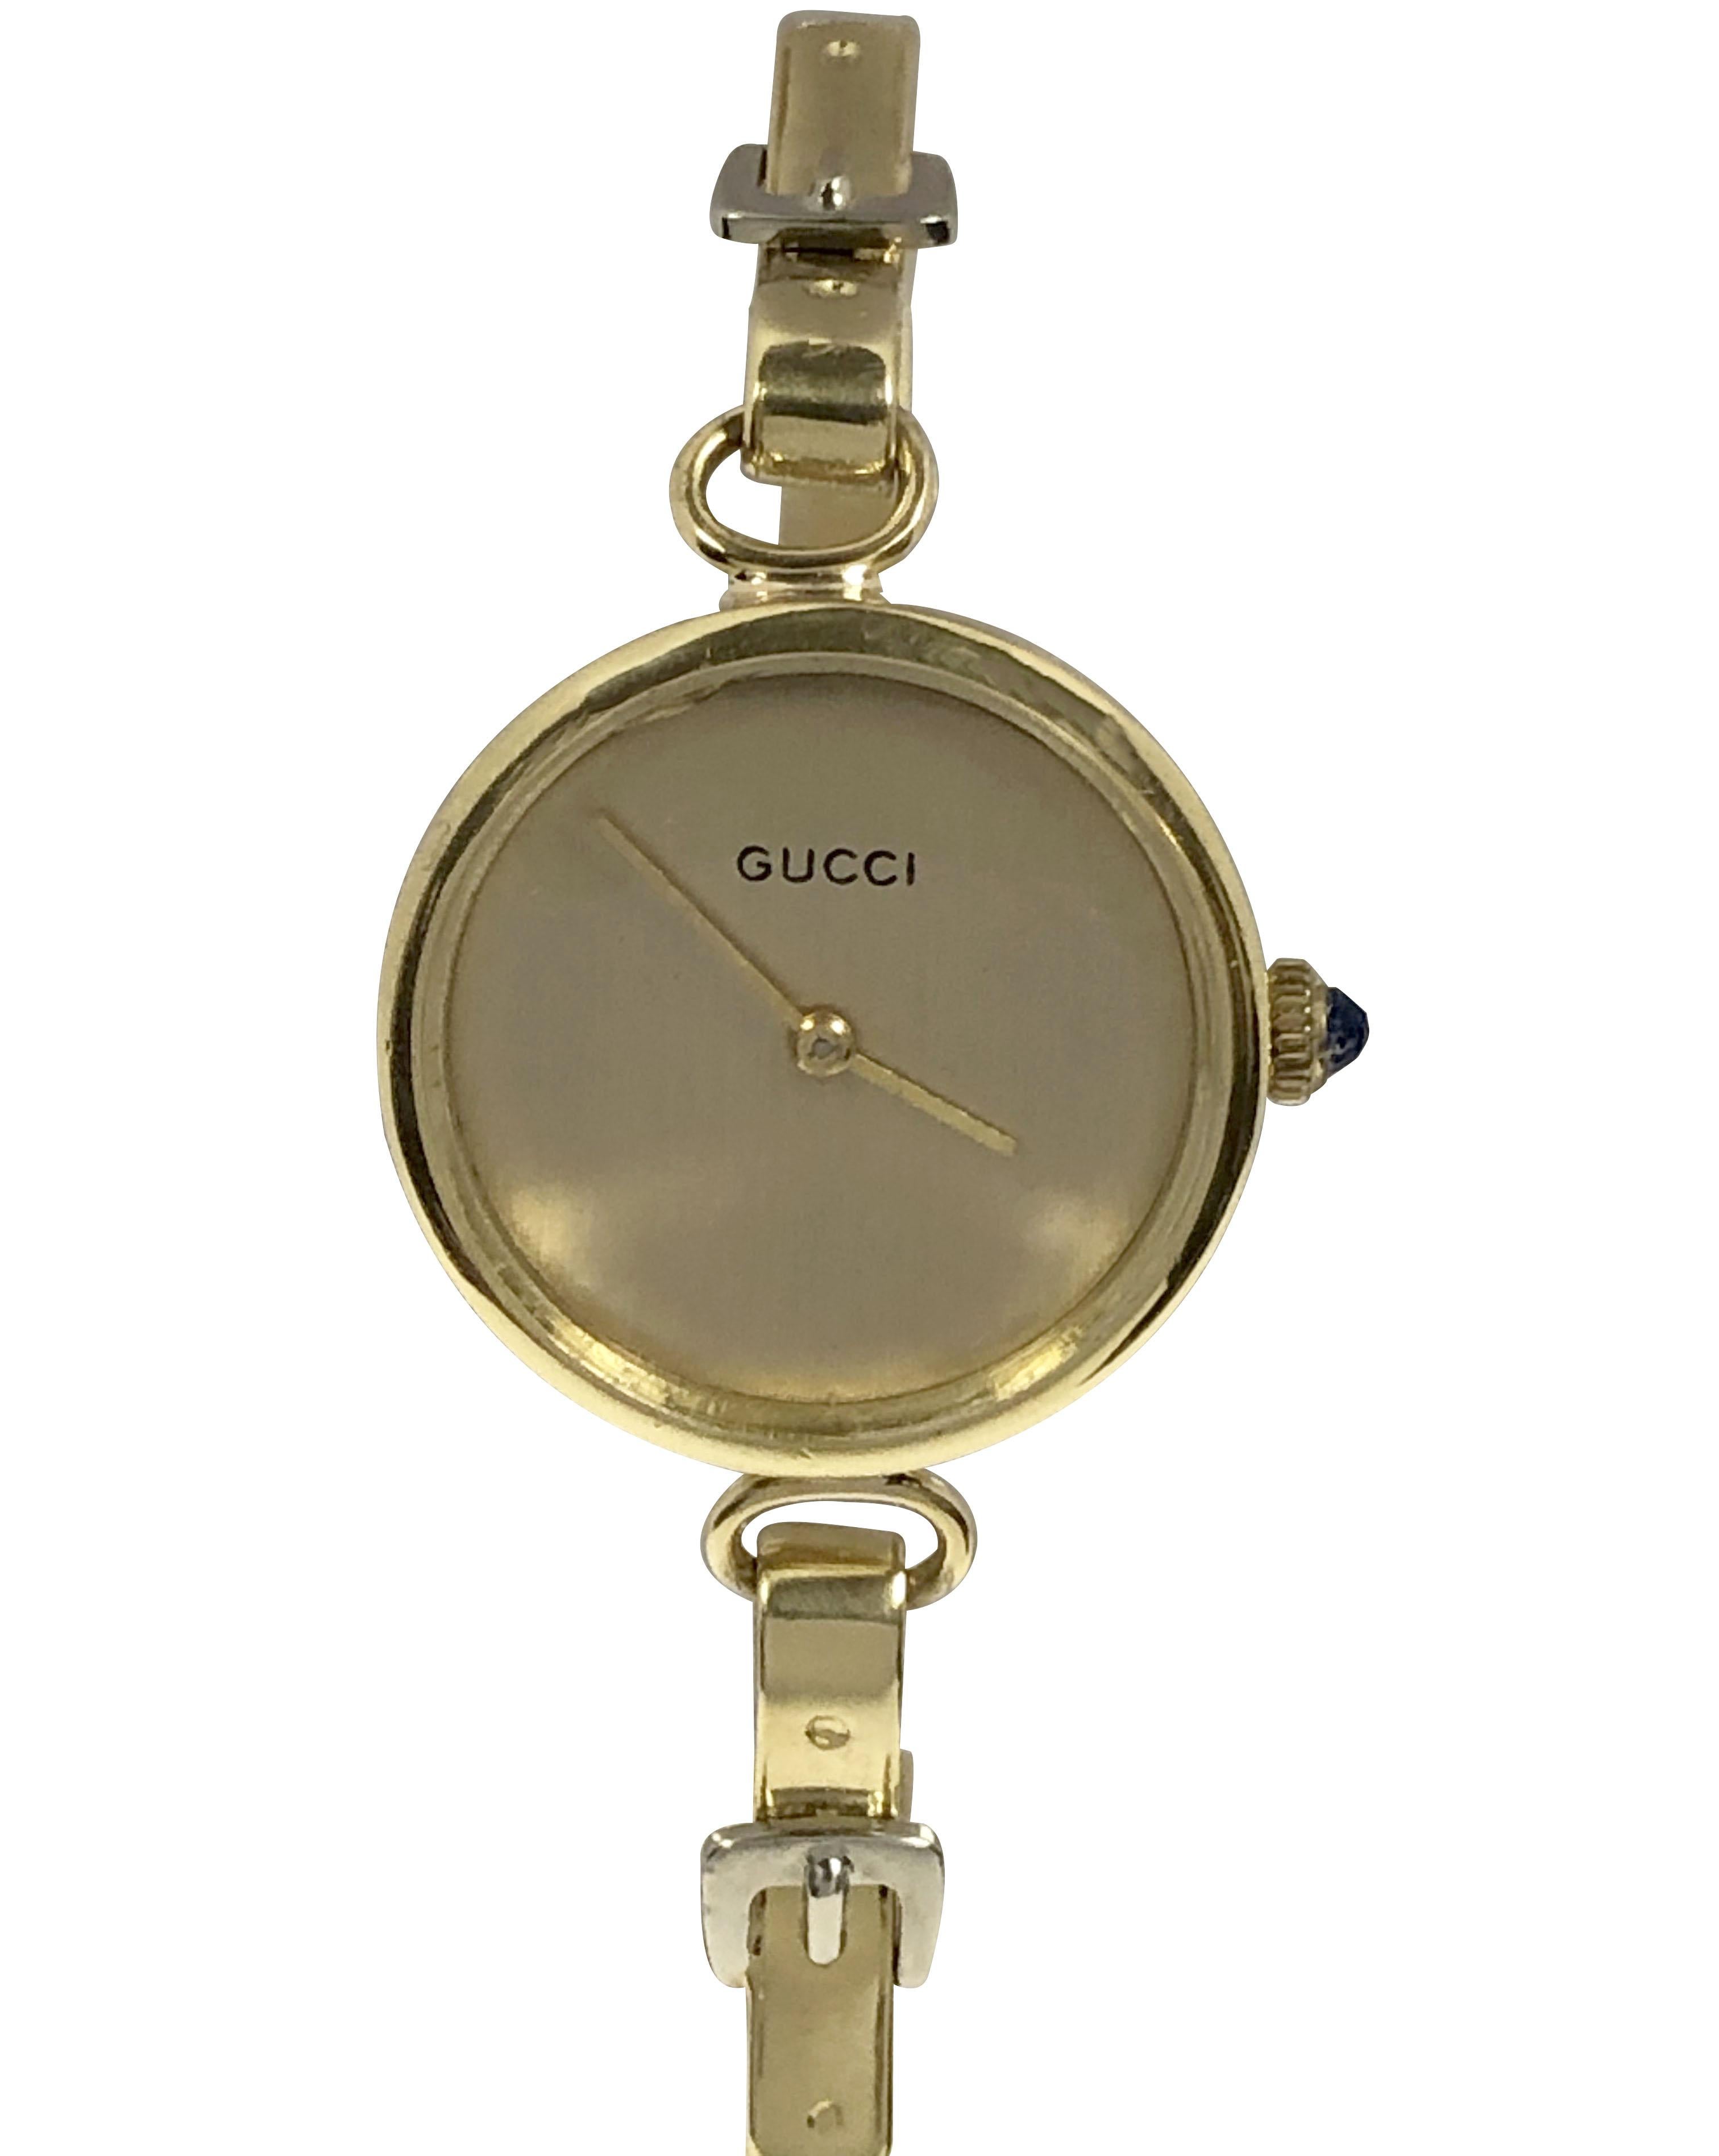 Circa 1970s Gucci for the French Market ladies 18k Yellow Gold Bracelet wrist watch, 24 M.M. 2 Piece case, 17 Jewel mechanical, manual wind movement, Gold Satin Dial with a Glass Crystal and a Sapphire Crown. Bangle style bracelet with Buckle Motif,